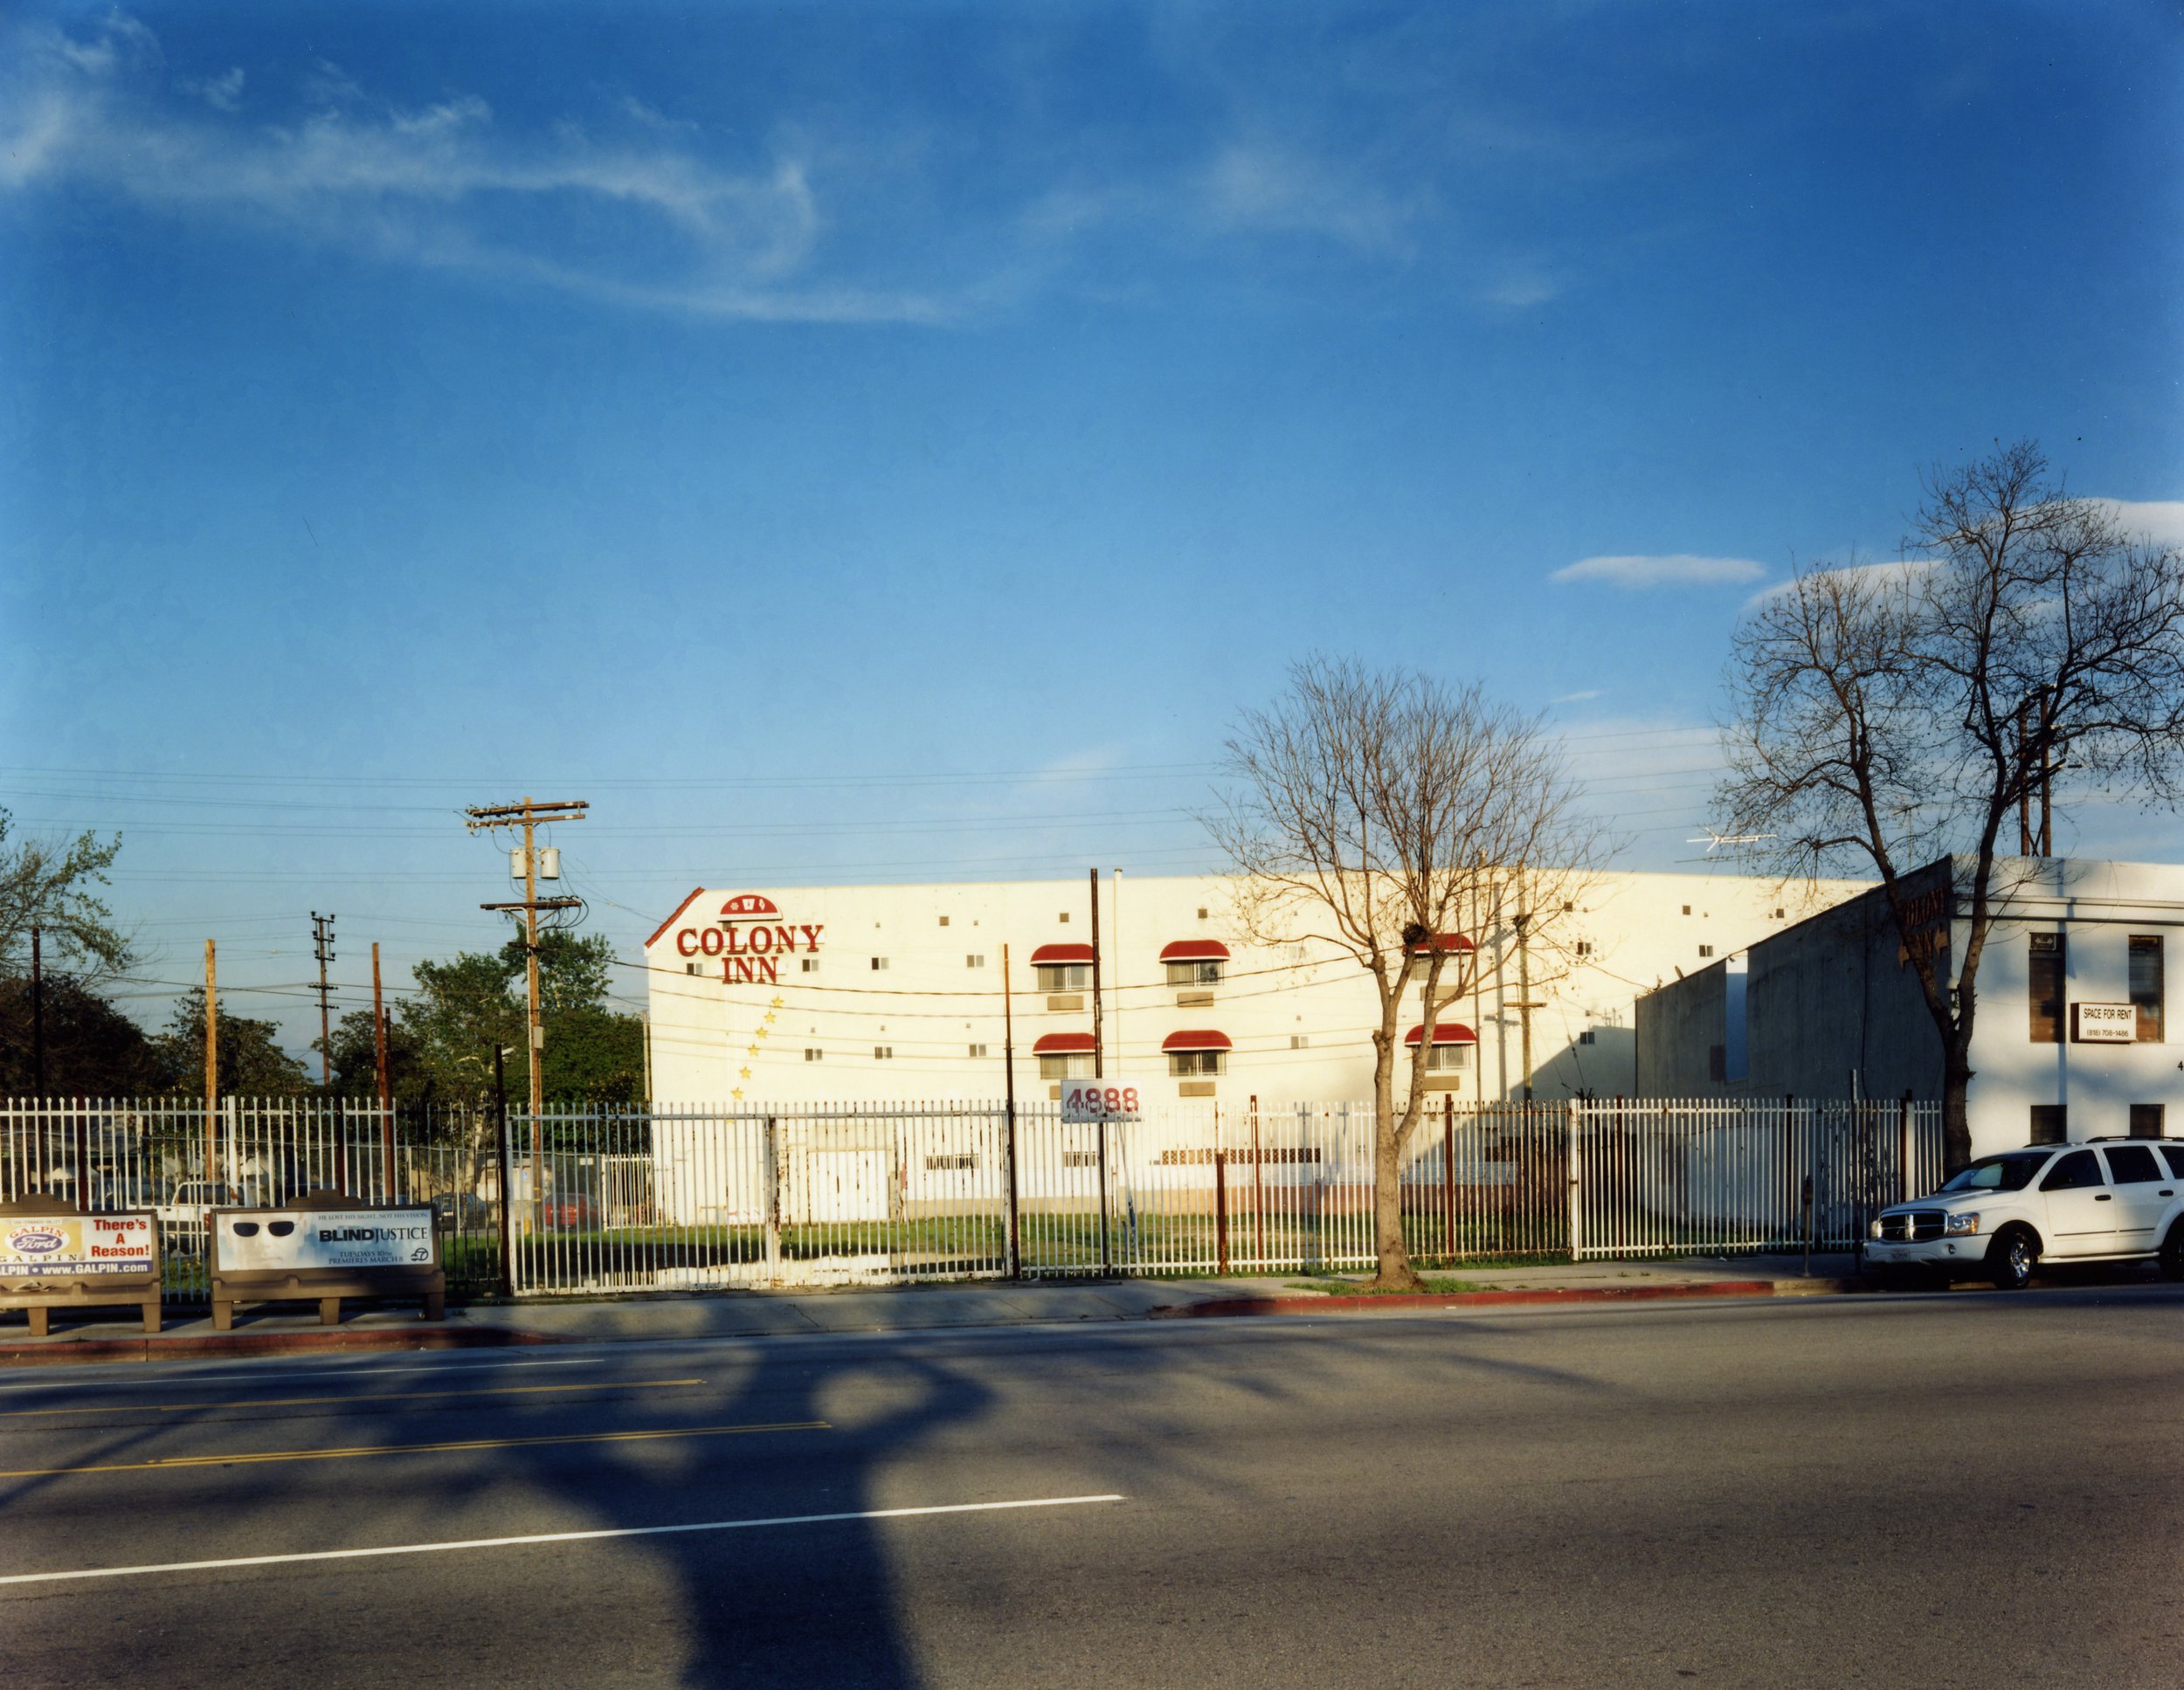  4888-4878 Lankershim Blvd. (formerly Club 22 and The Big Horn), North Hollywood, CA, 2005 